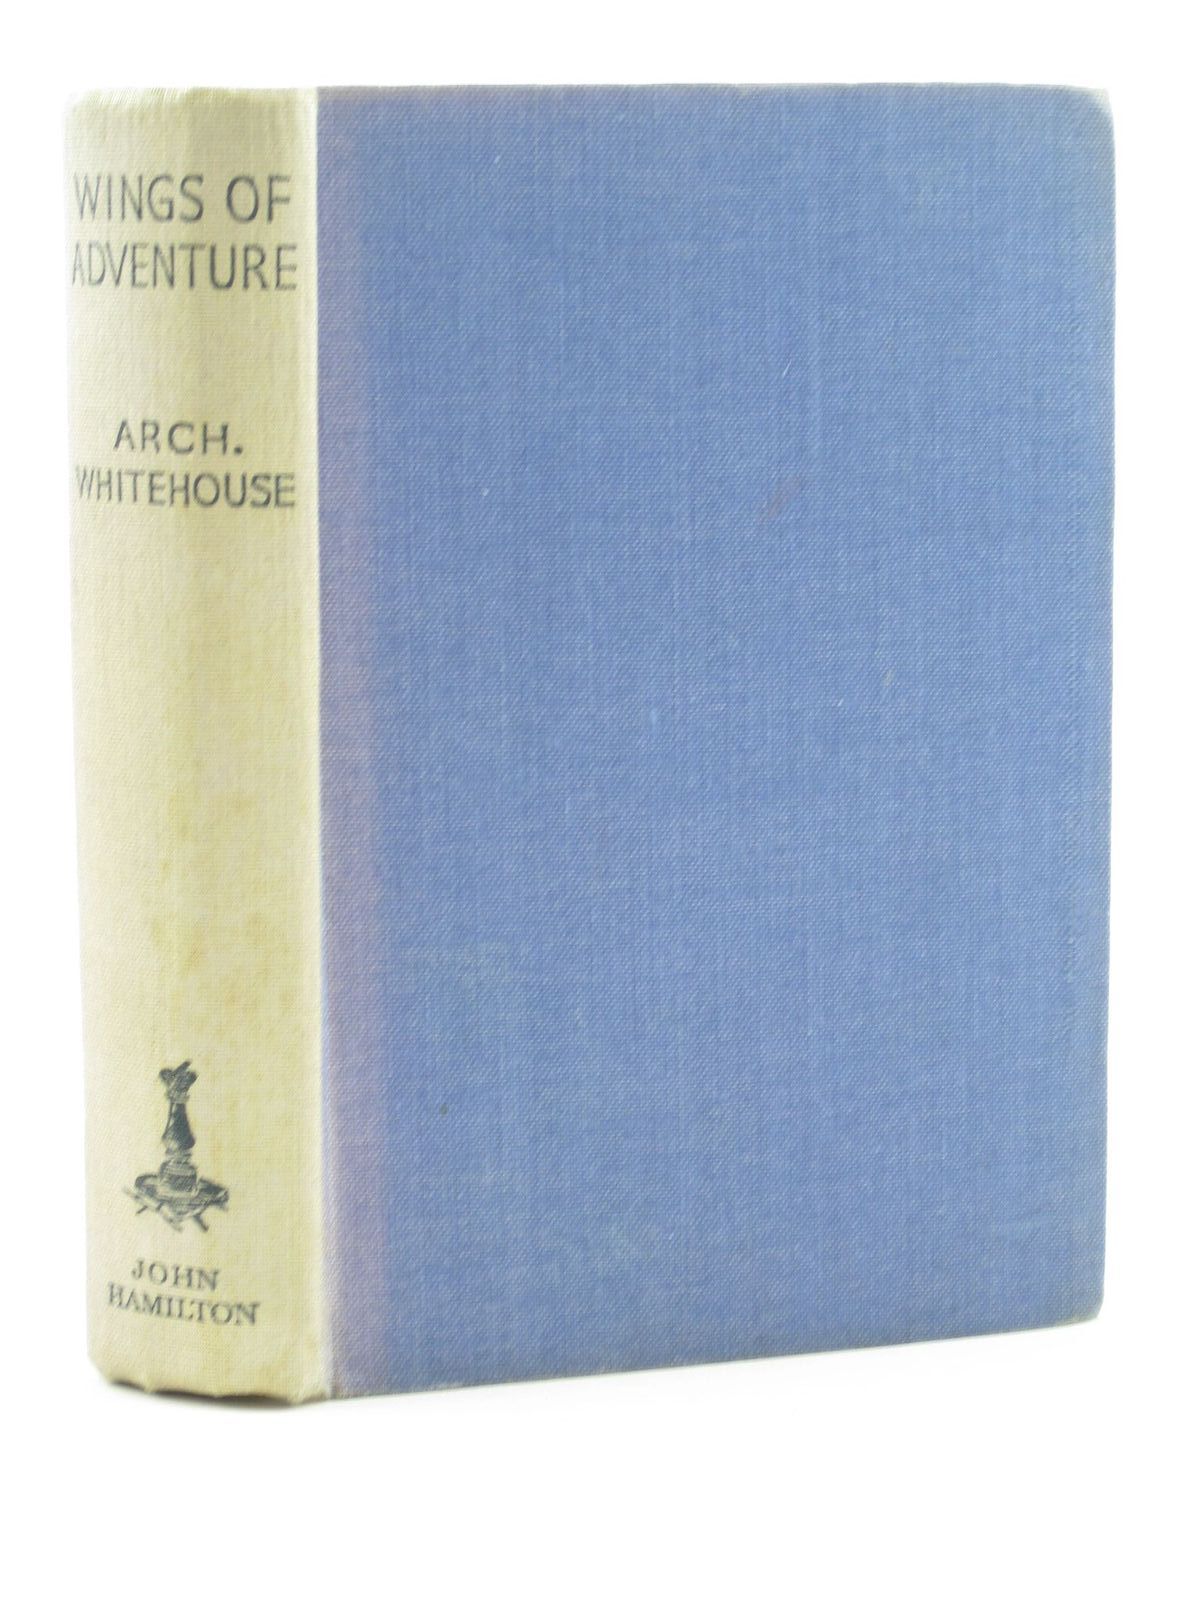 Photo of WINGS OF ADVENTURE written by Whitehouse, Arch published by John Hamilton Ltd. (STOCK CODE: 1311575)  for sale by Stella & Rose's Books